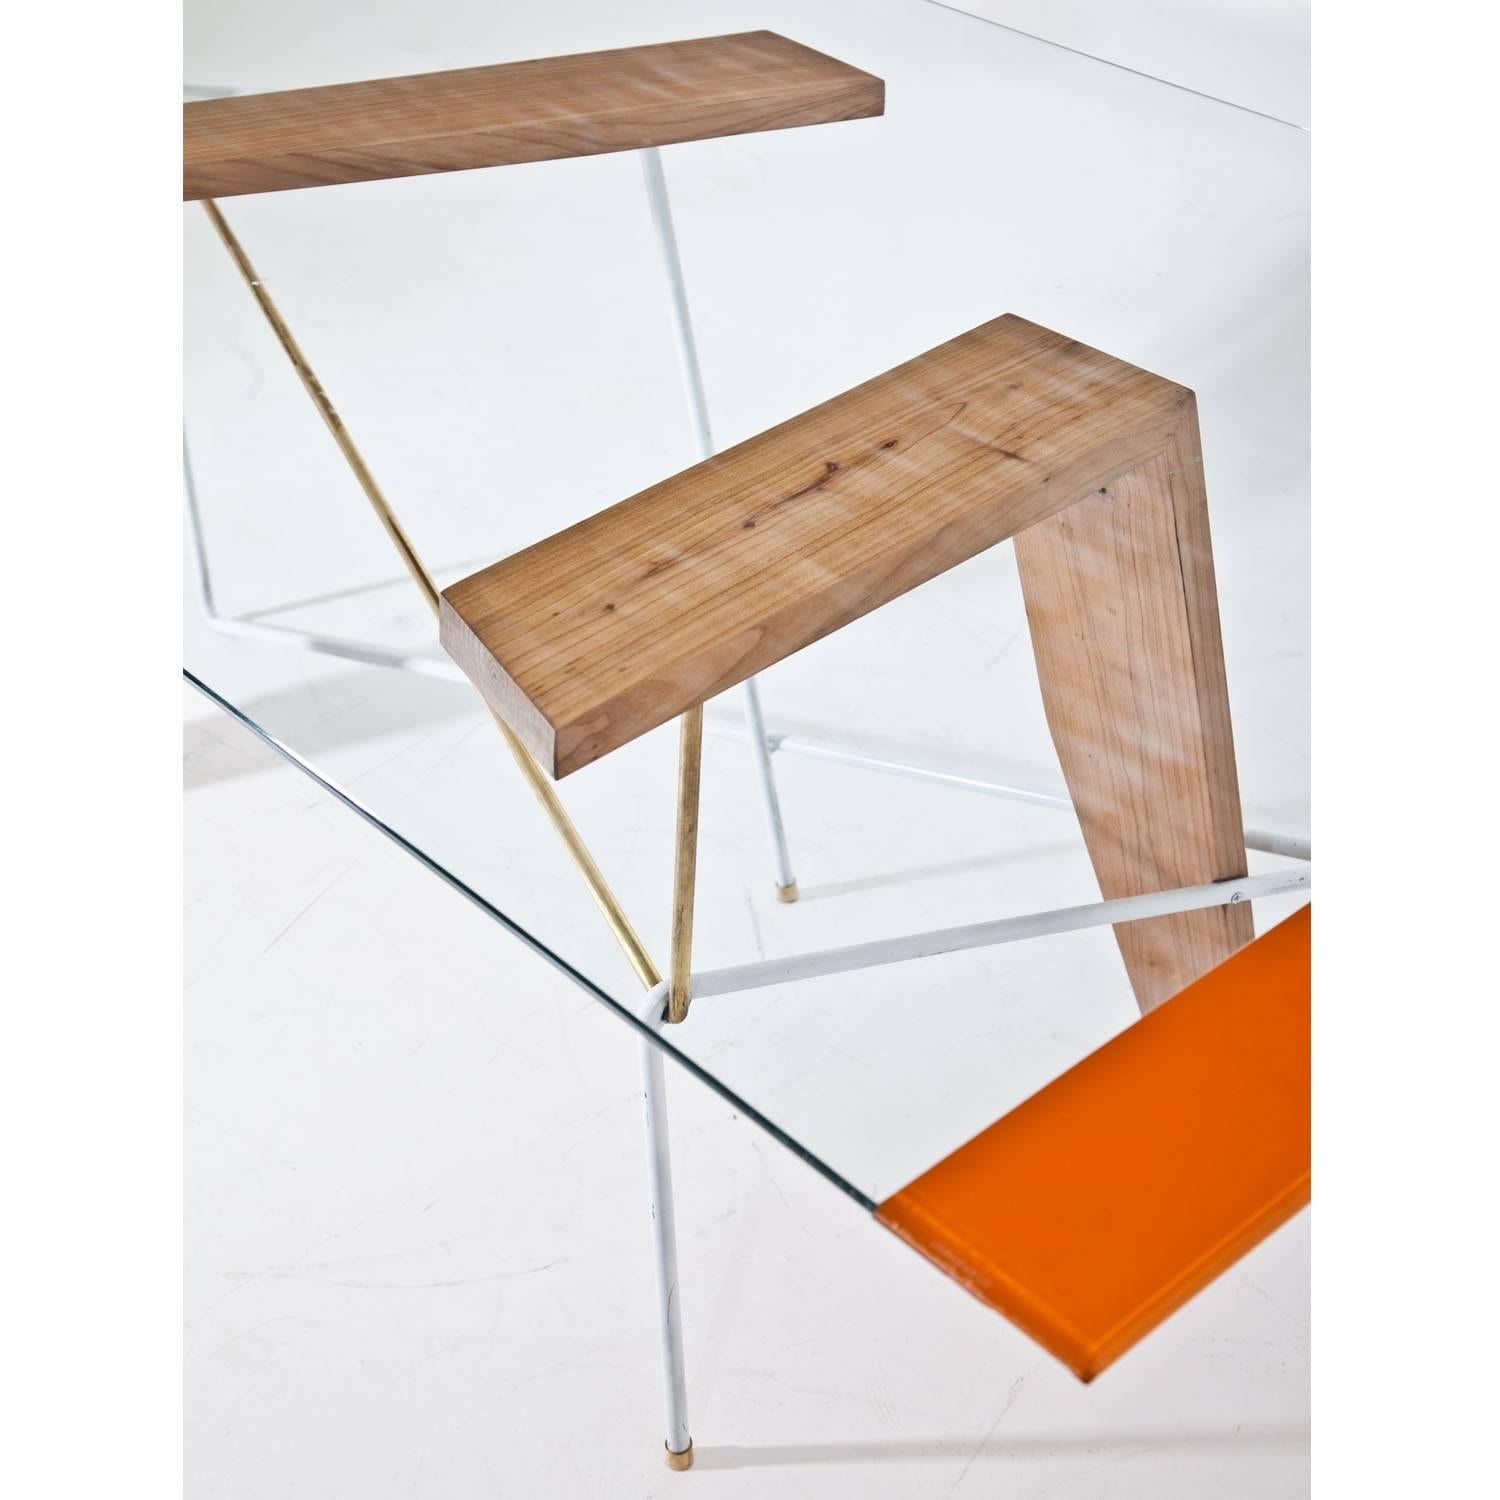 Large table with an extraordinary base out of wood, brass and metal by Mordecai Pillant. The rectangular glass tabletop with an orange strip, labeled “Croazia 20”.